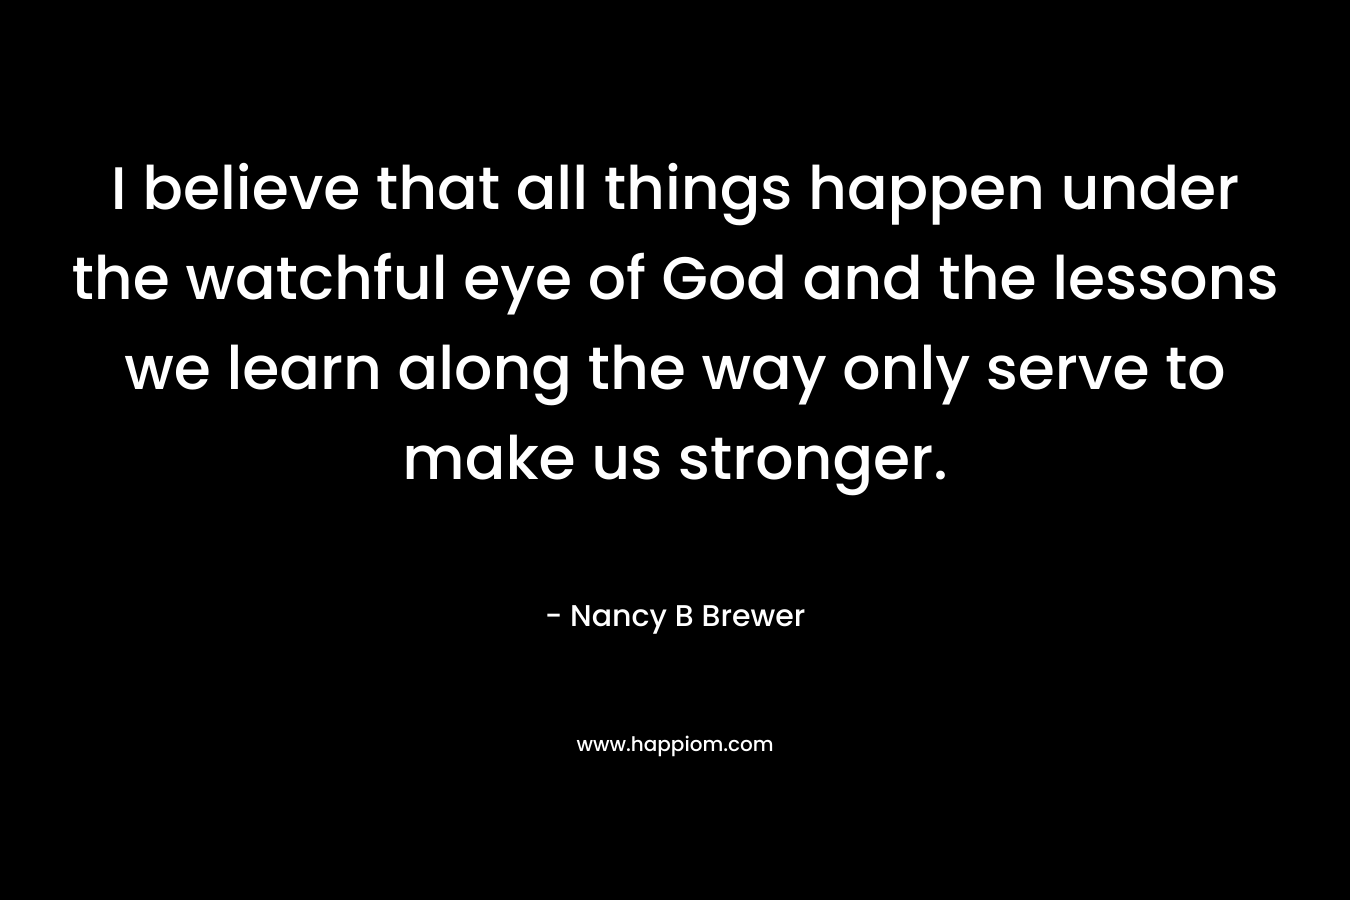 I believe that all things happen under the watchful eye of God and the lessons we learn along the way only serve to make us stronger.